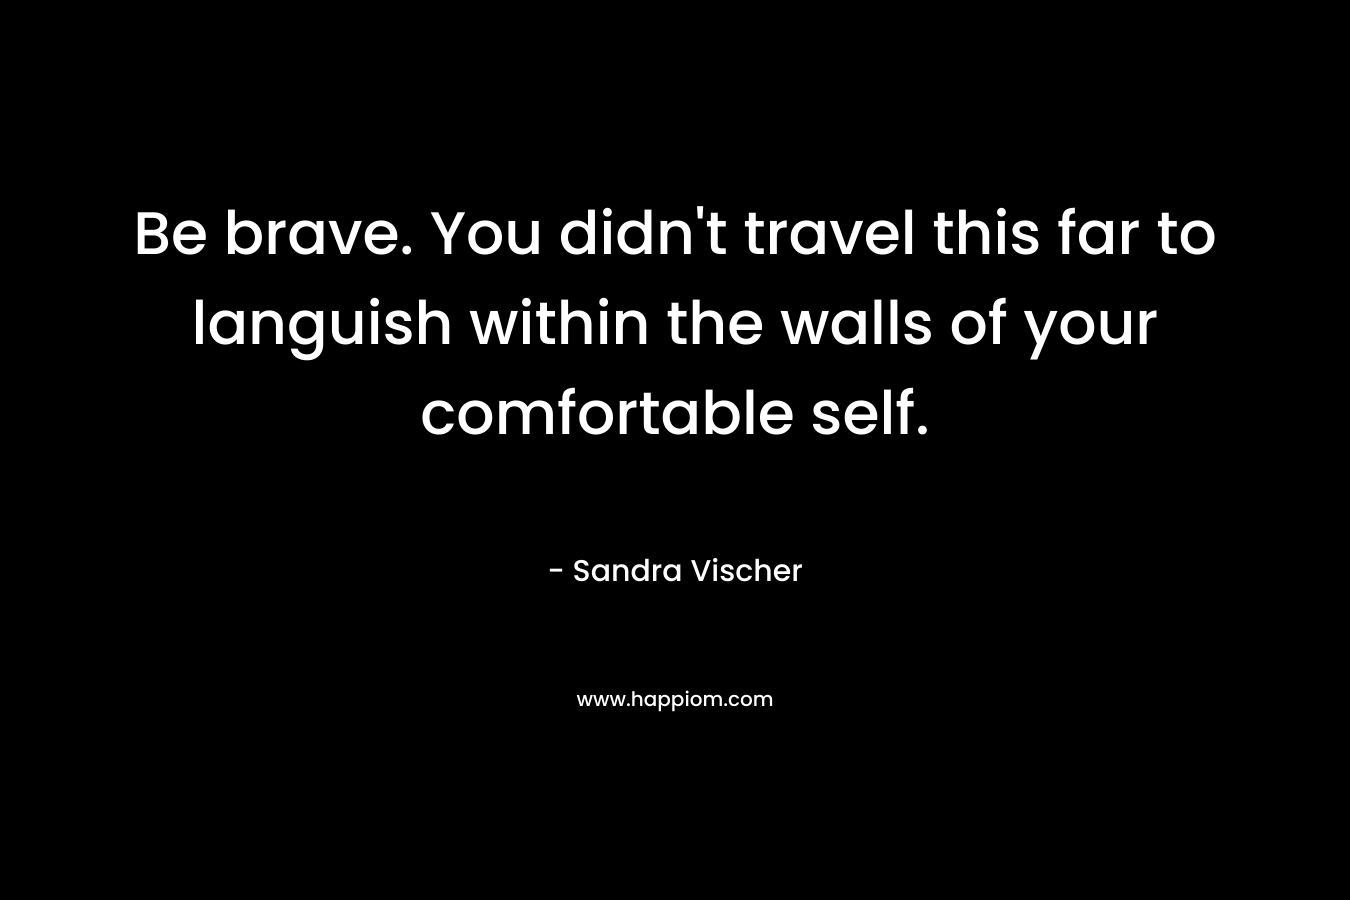 Be brave. You didn’t travel this far to languish within the walls of your comfortable self. – Sandra Vischer